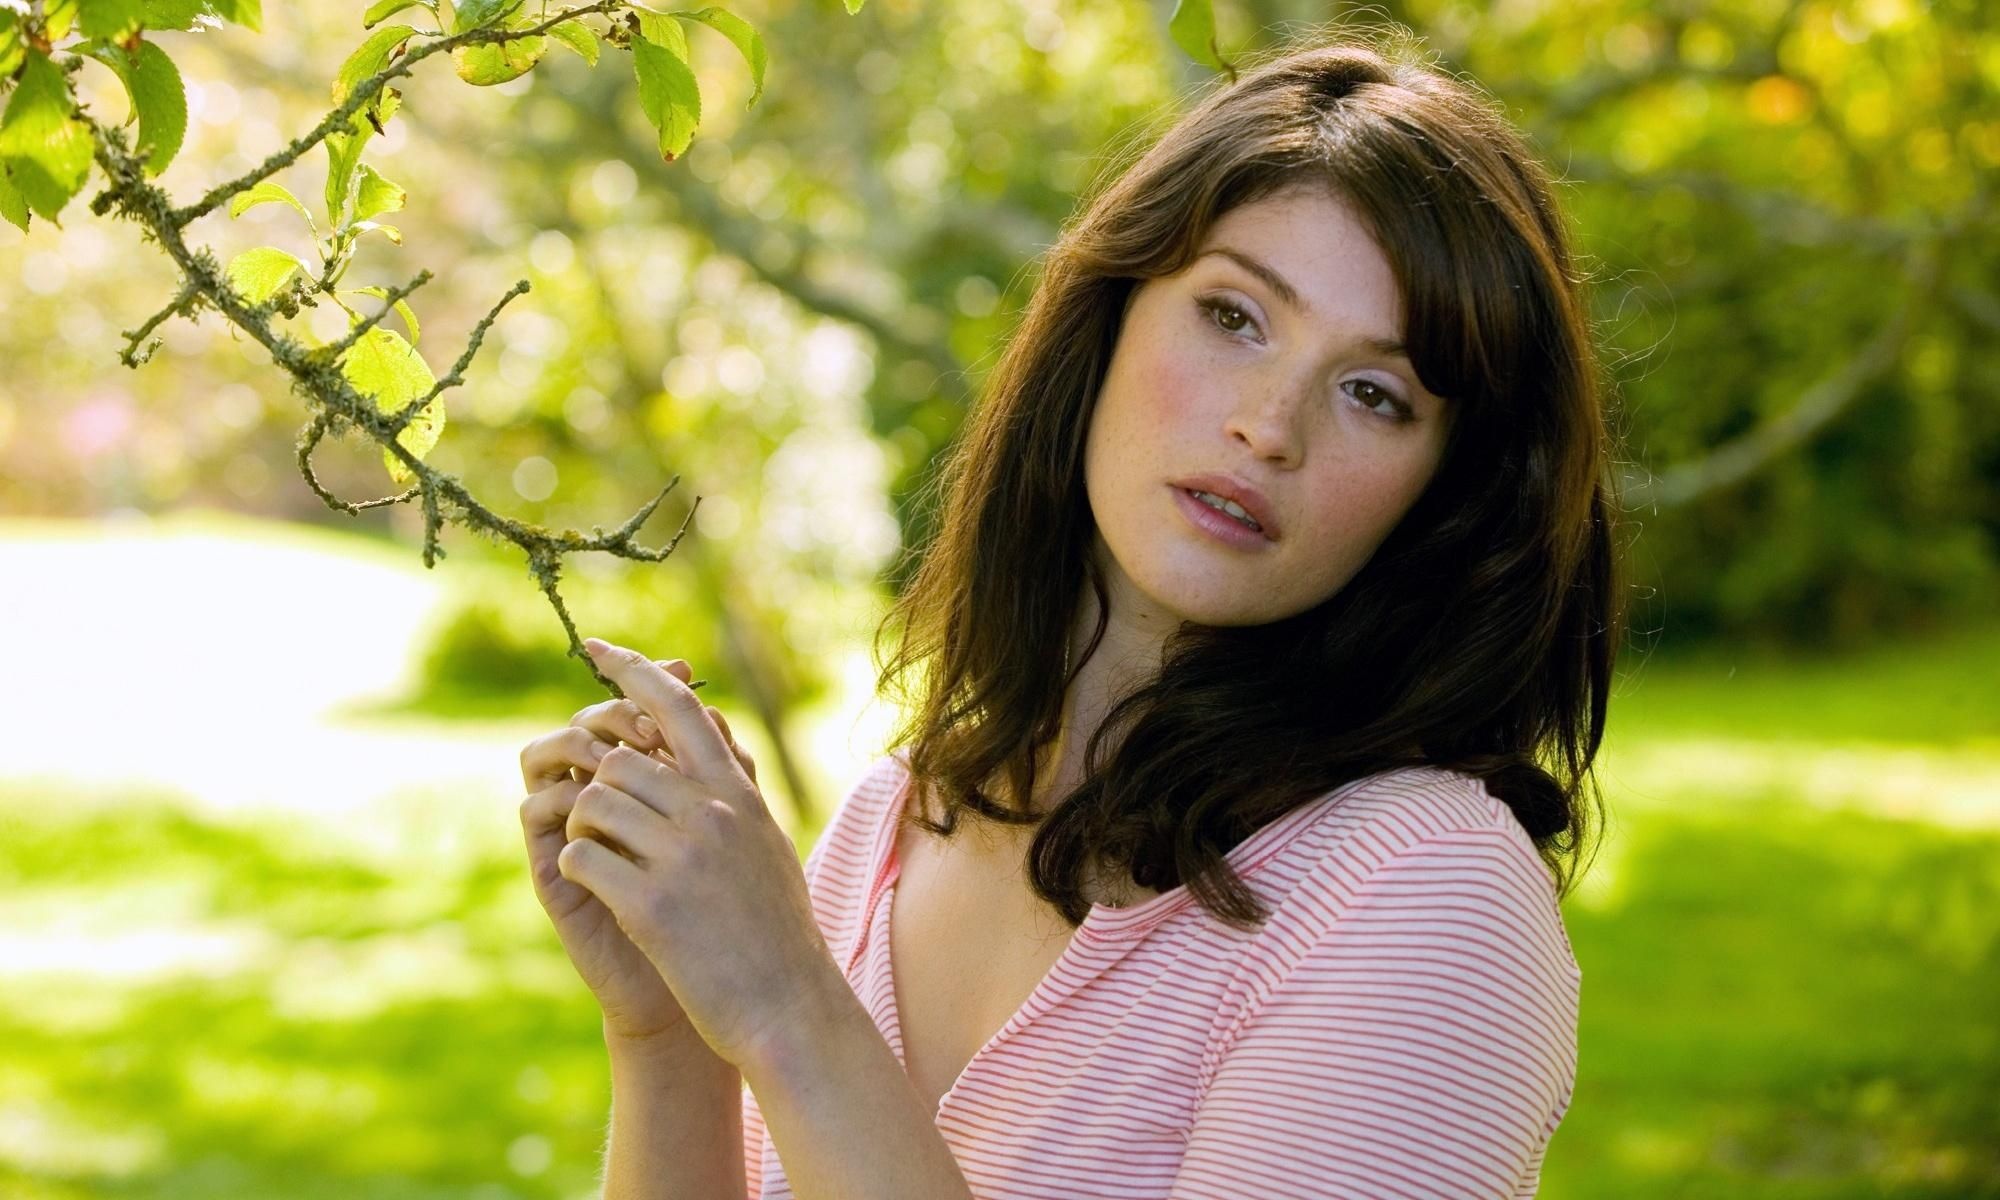 Gemma Arterton: The role of Tara, Nominated for a BIFA award for Best Actress in a British Independent Film. 2000x1200 HD Wallpaper.